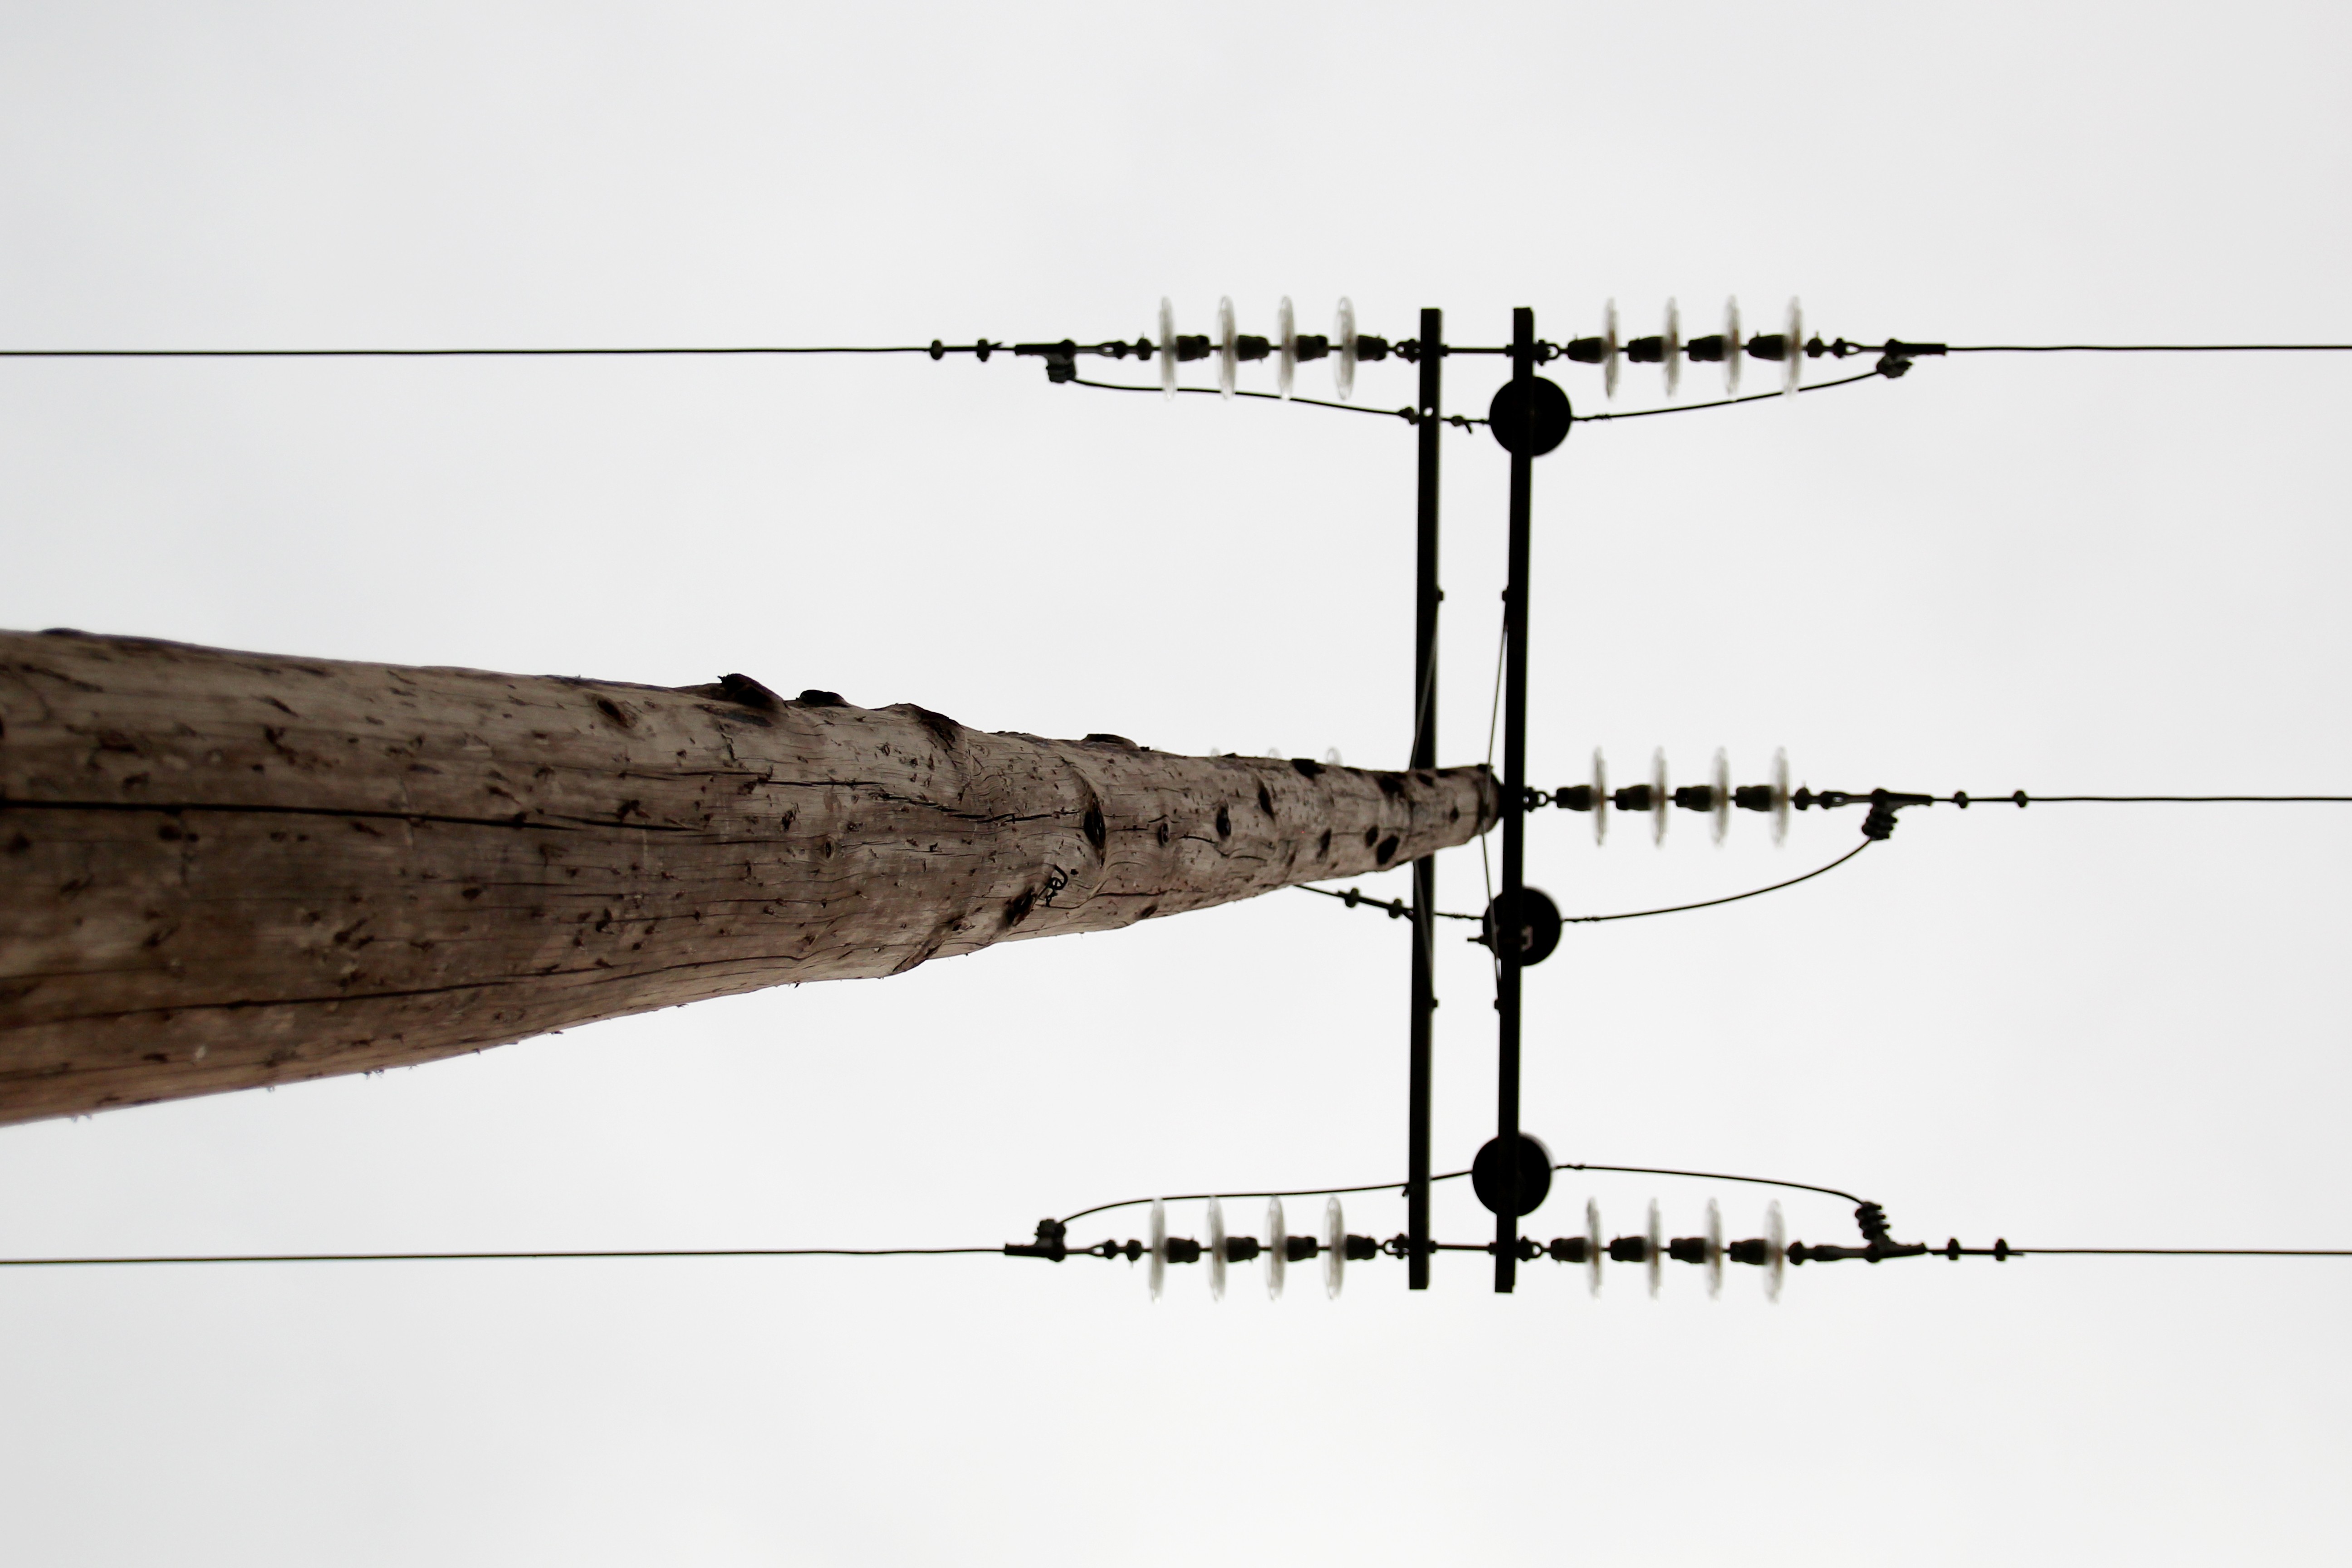 General 5184x3456 power lines worm's eye view overcast simple background wood utility pole bottom view pylon